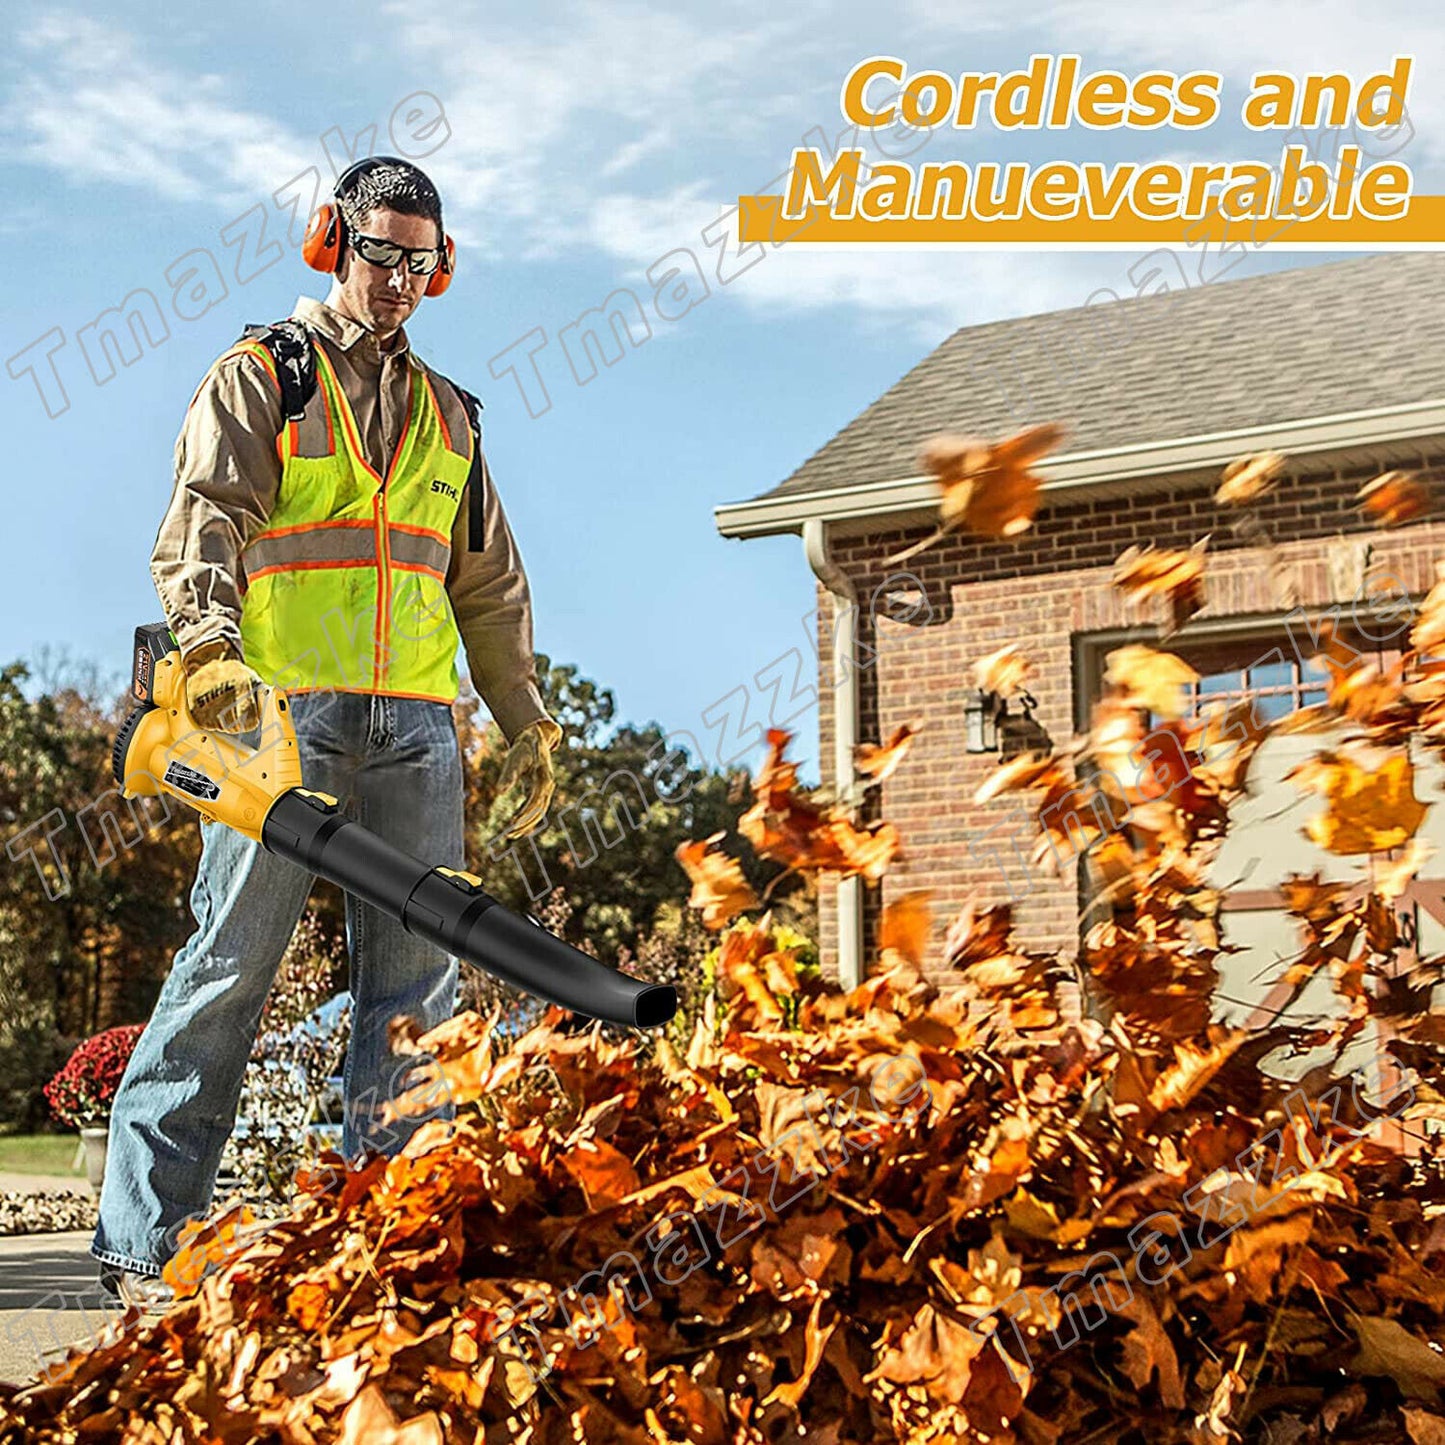 21V Electric Cordless Handheld Leaf Blower for Dust or Snow Debris Blower - 150 MPH Battery Powered - Westfield Retailers